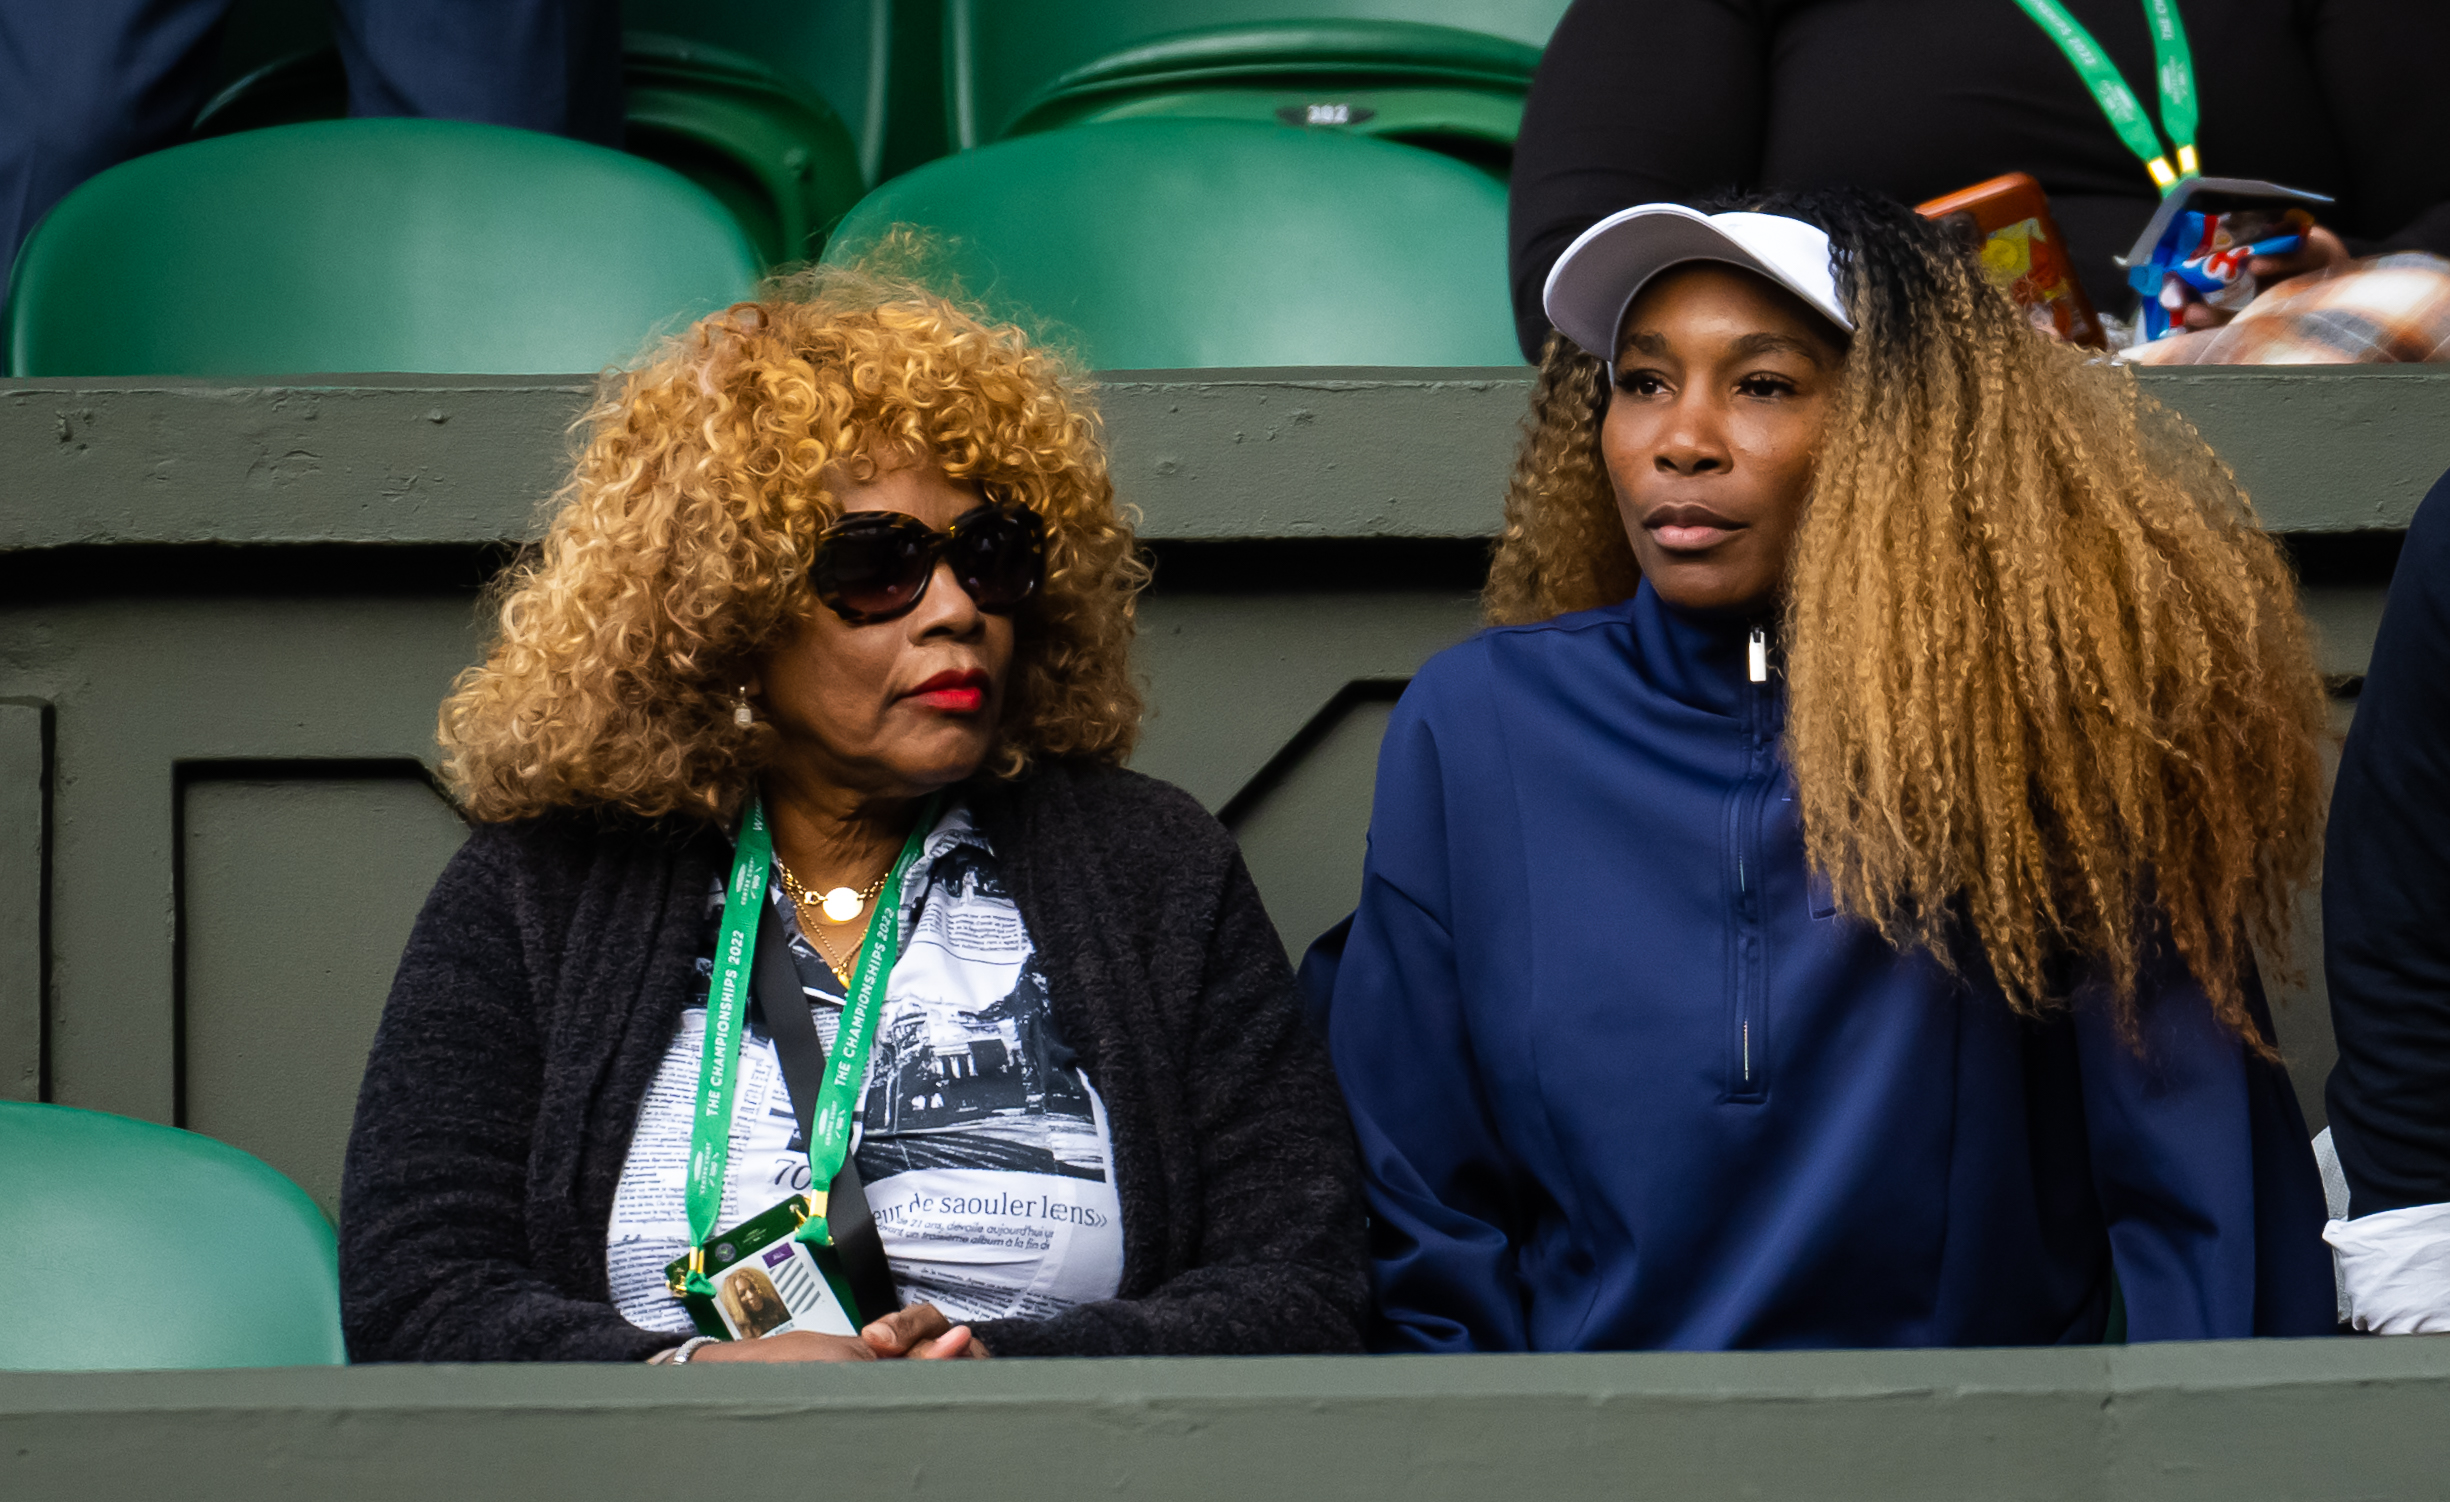 Oracene Price and Venus Williams watch Serena Williams play on June 28, 2022 in London, England. | Source: Getty Images